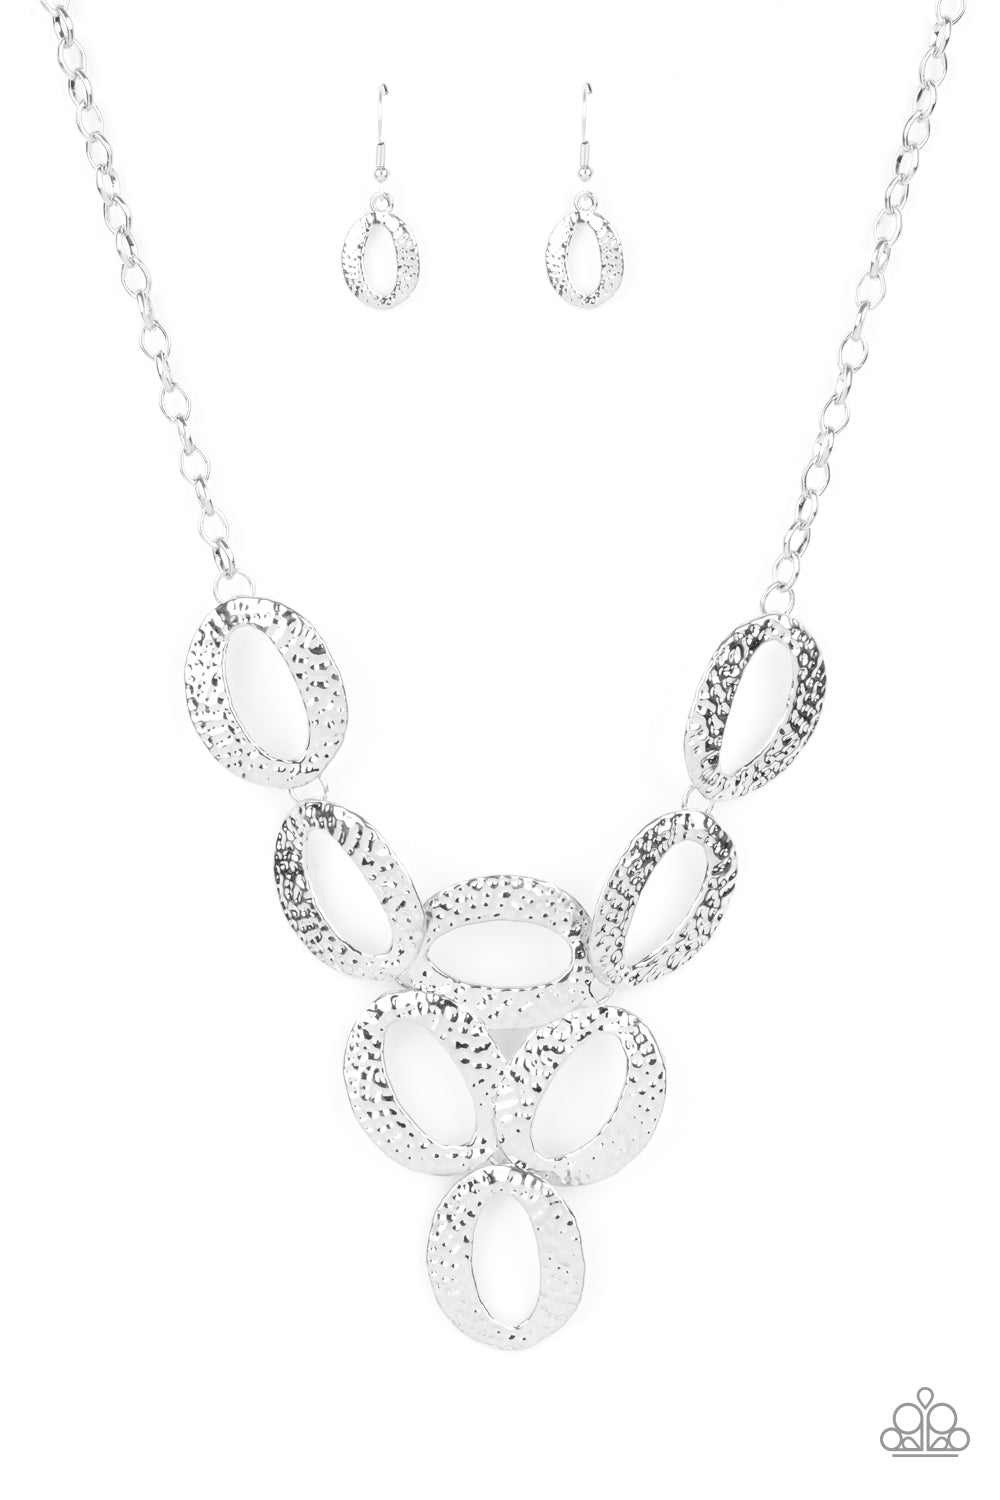 OVAL The Limit - Silver Necklace